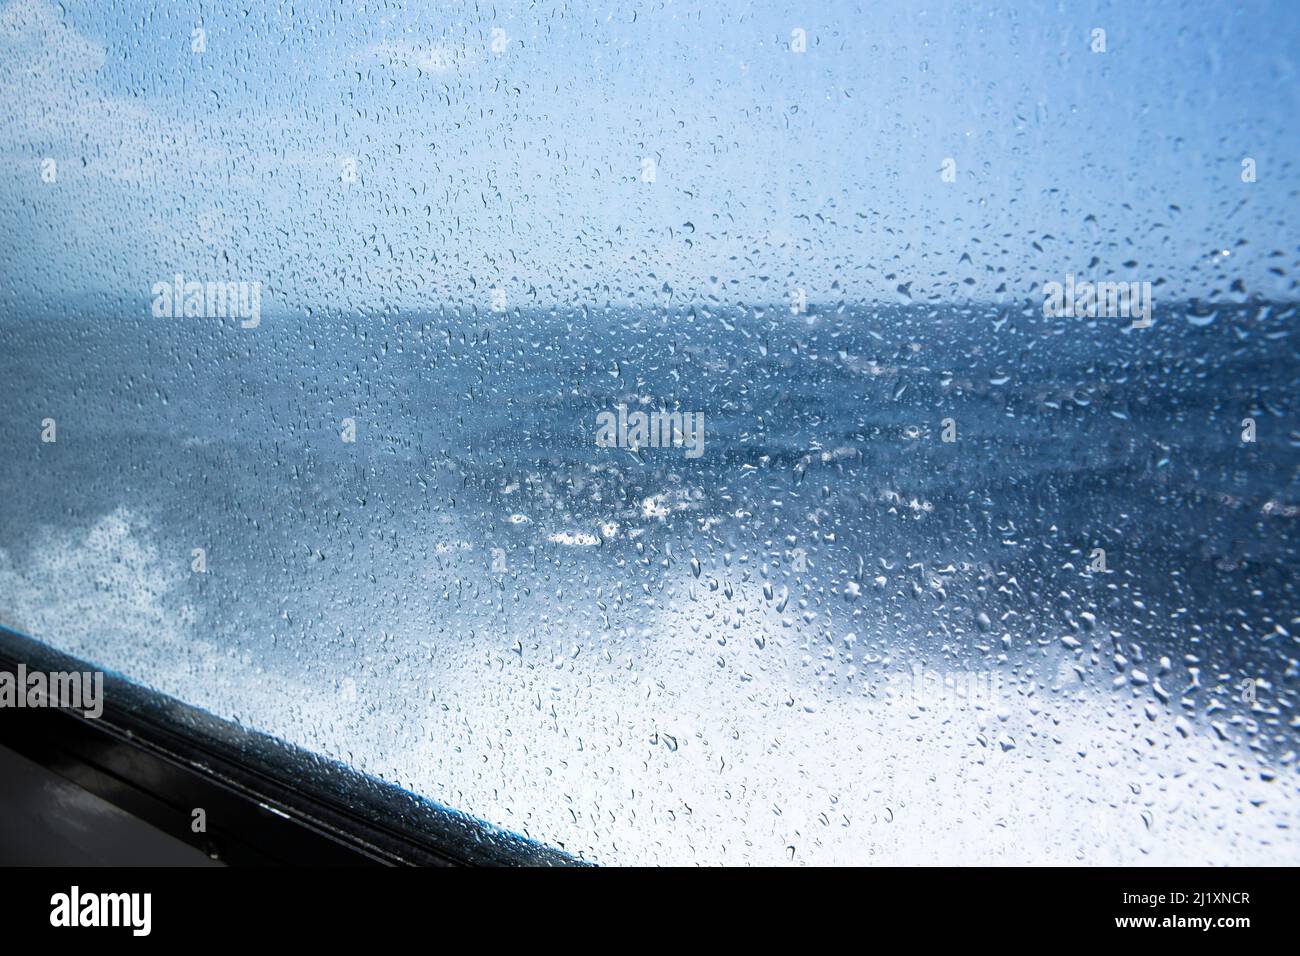 Looking out of the window of a tourist boat at the sea, weather trhough water drops on the glass on the northern Italian coastline. Stock Photo